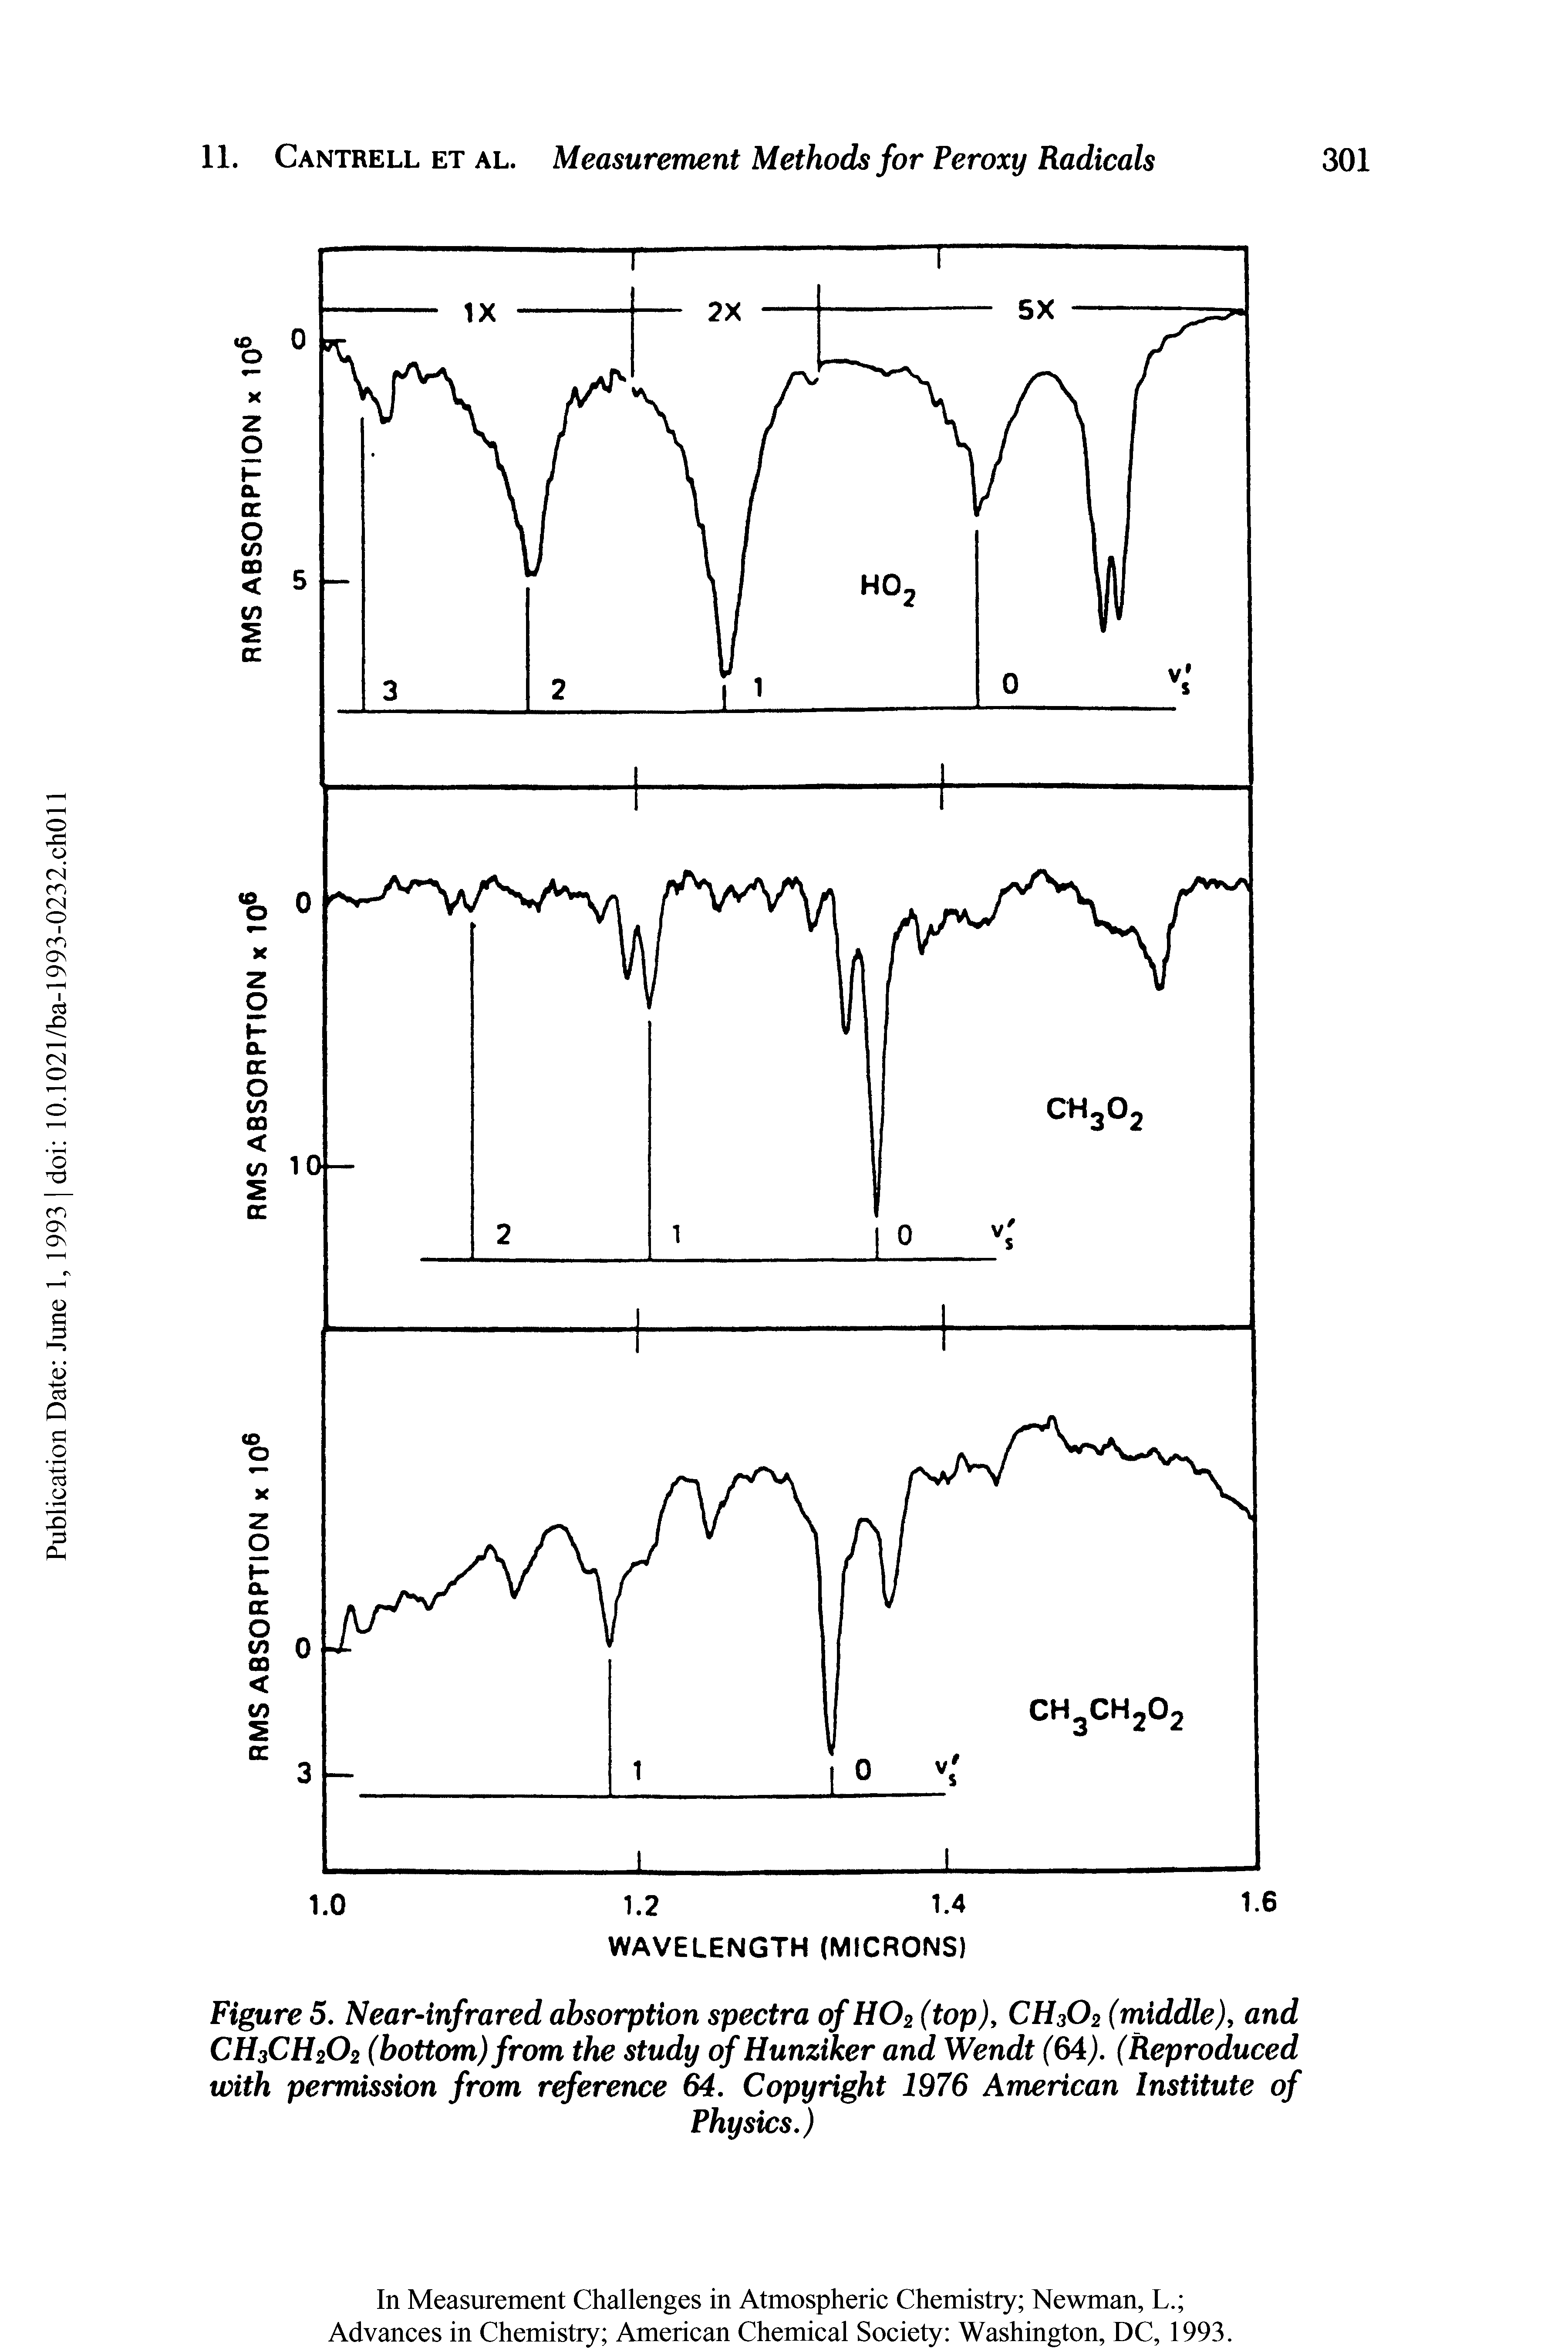 Figure 5. Near-infrared absorption spectra of H02 (top), CH302 (middle), and CH3CH202 (bottom) from the study of Hunziker and Wendt (64). (Reproduced with permission from reference 64. Copyright 1976 American Institute of...